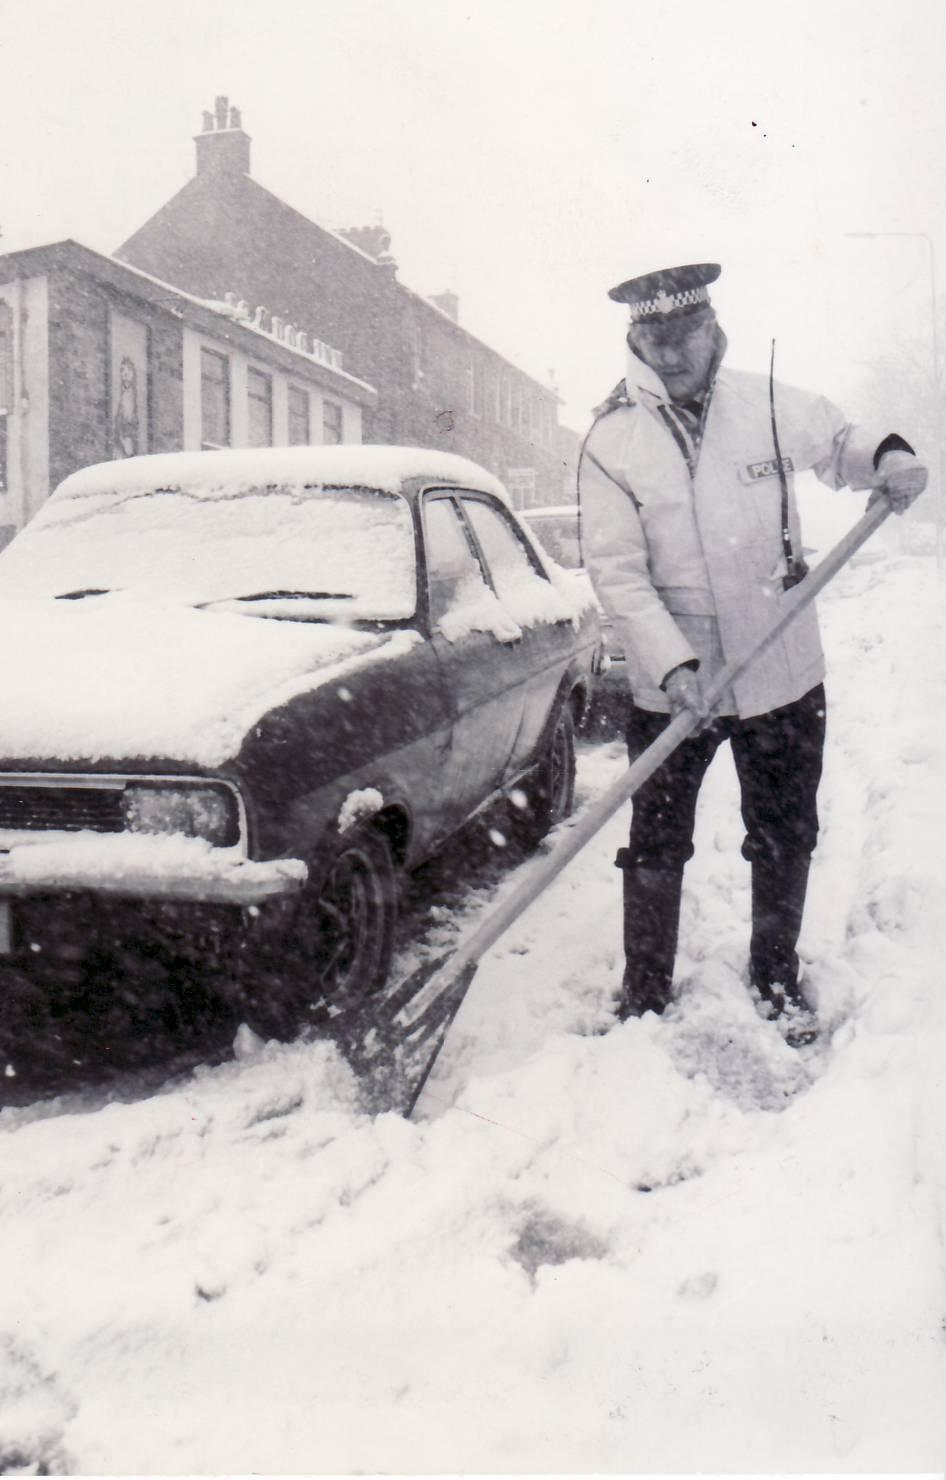 January 1984 - Belmont policeman Bill Gilbertson clears away snow for a driver